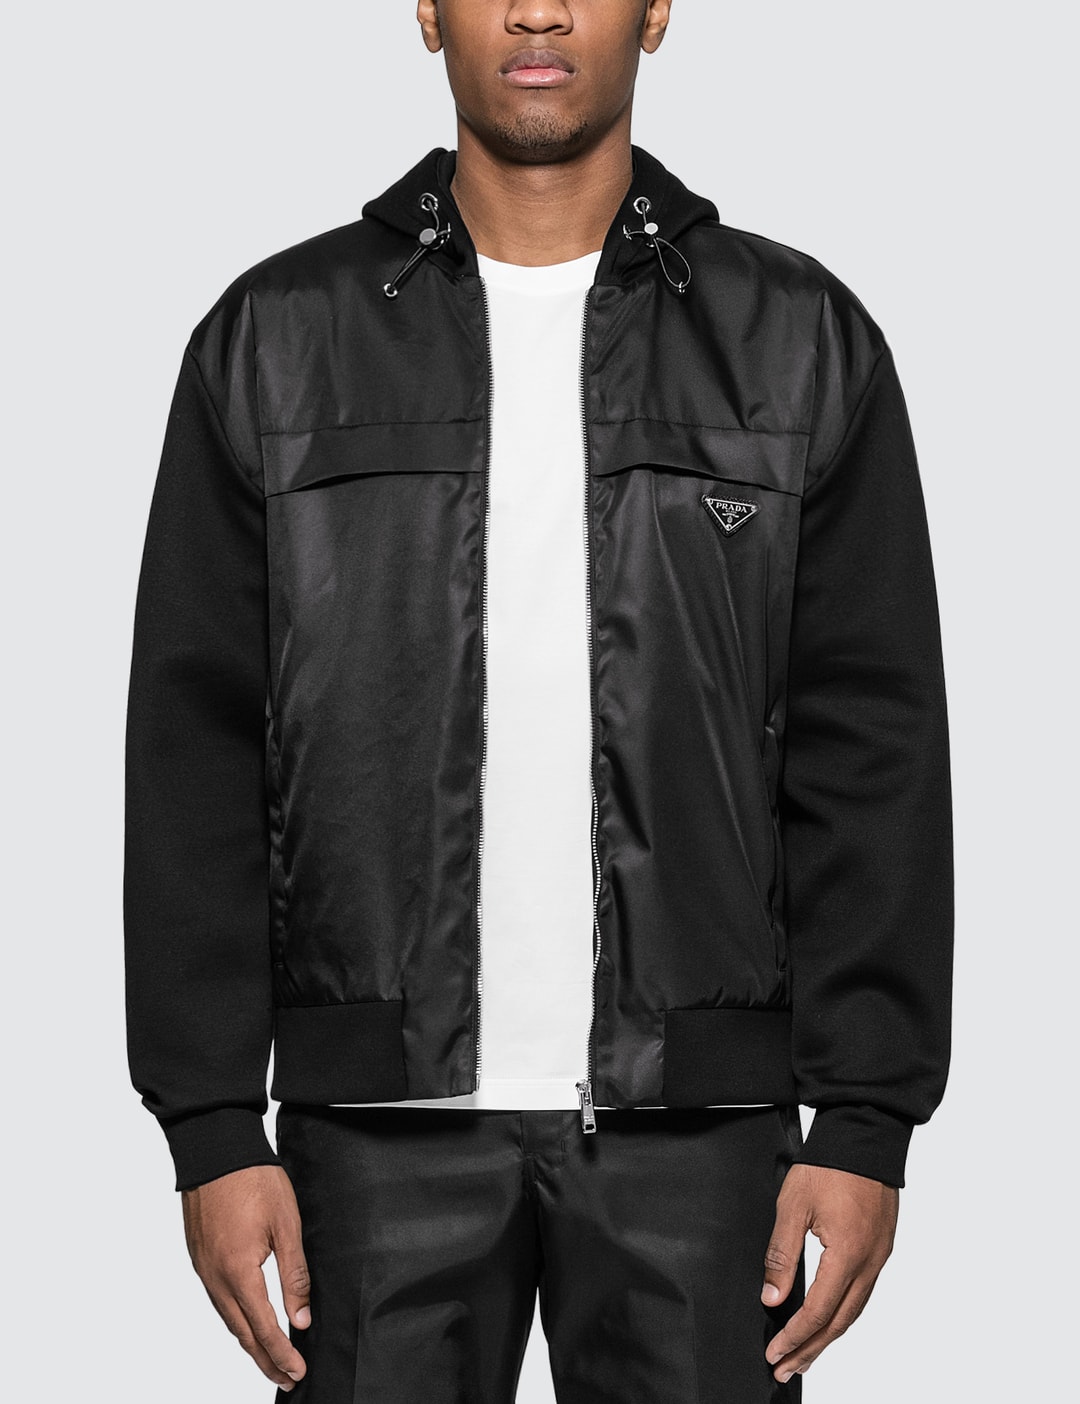 Prada - Nylon Knit Jacket | HBX - Globally Curated Fashion and Lifestyle by  Hypebeast